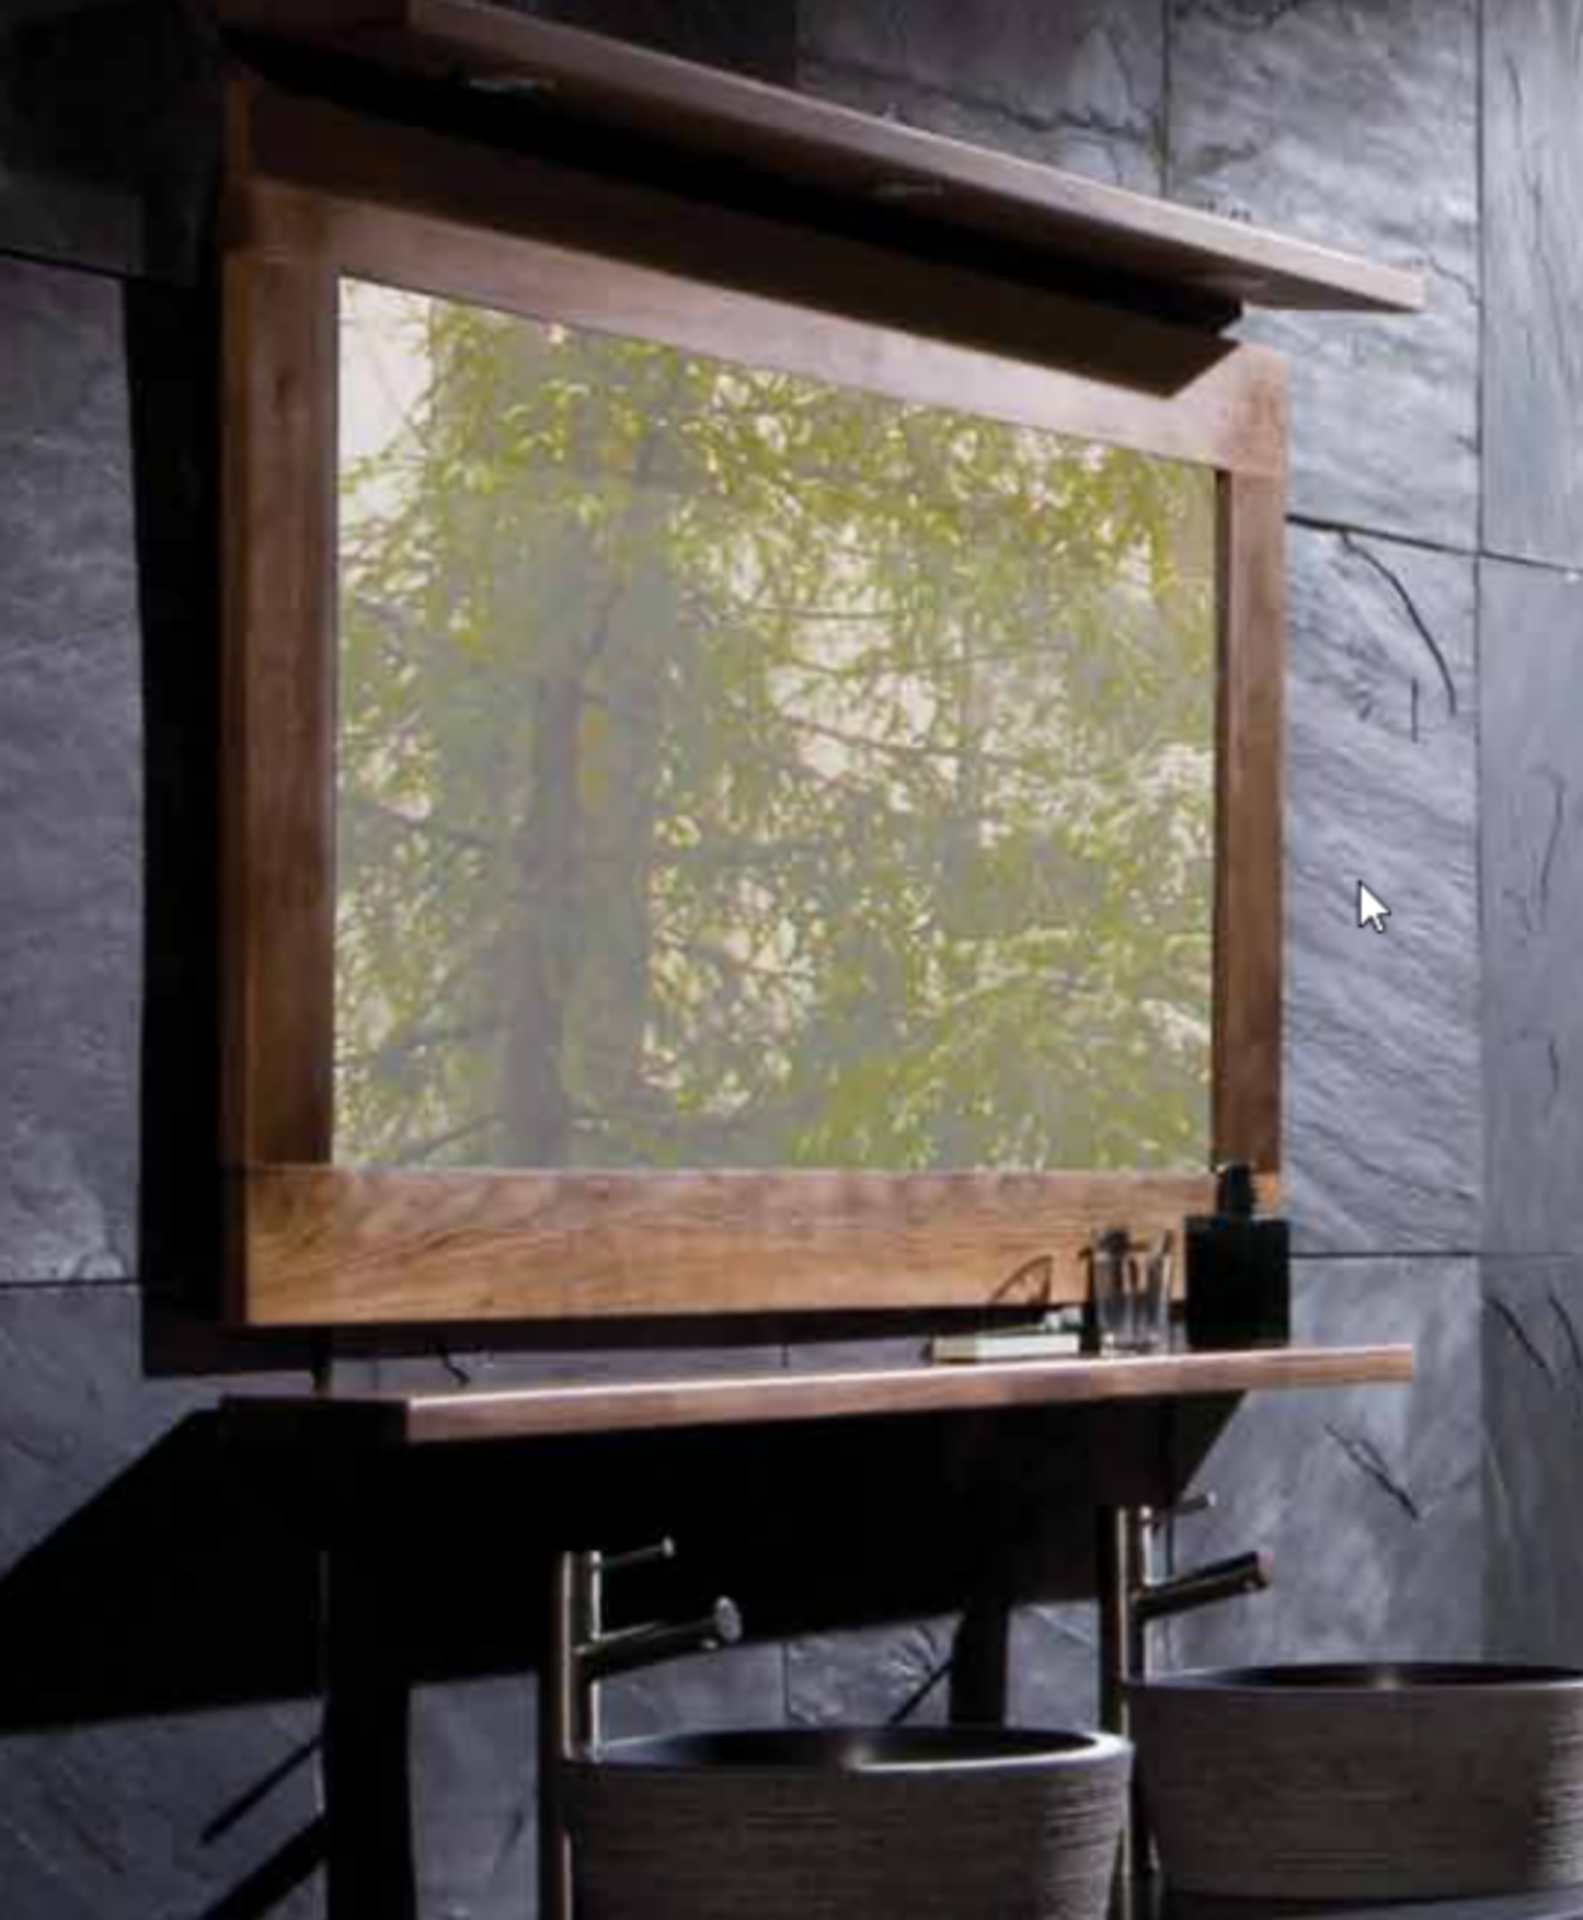 1 x Stonearth Small Bathroom Wall Mirror - American Solid Walnut Frame With Bevelled Glass - Size: - Image 6 of 11